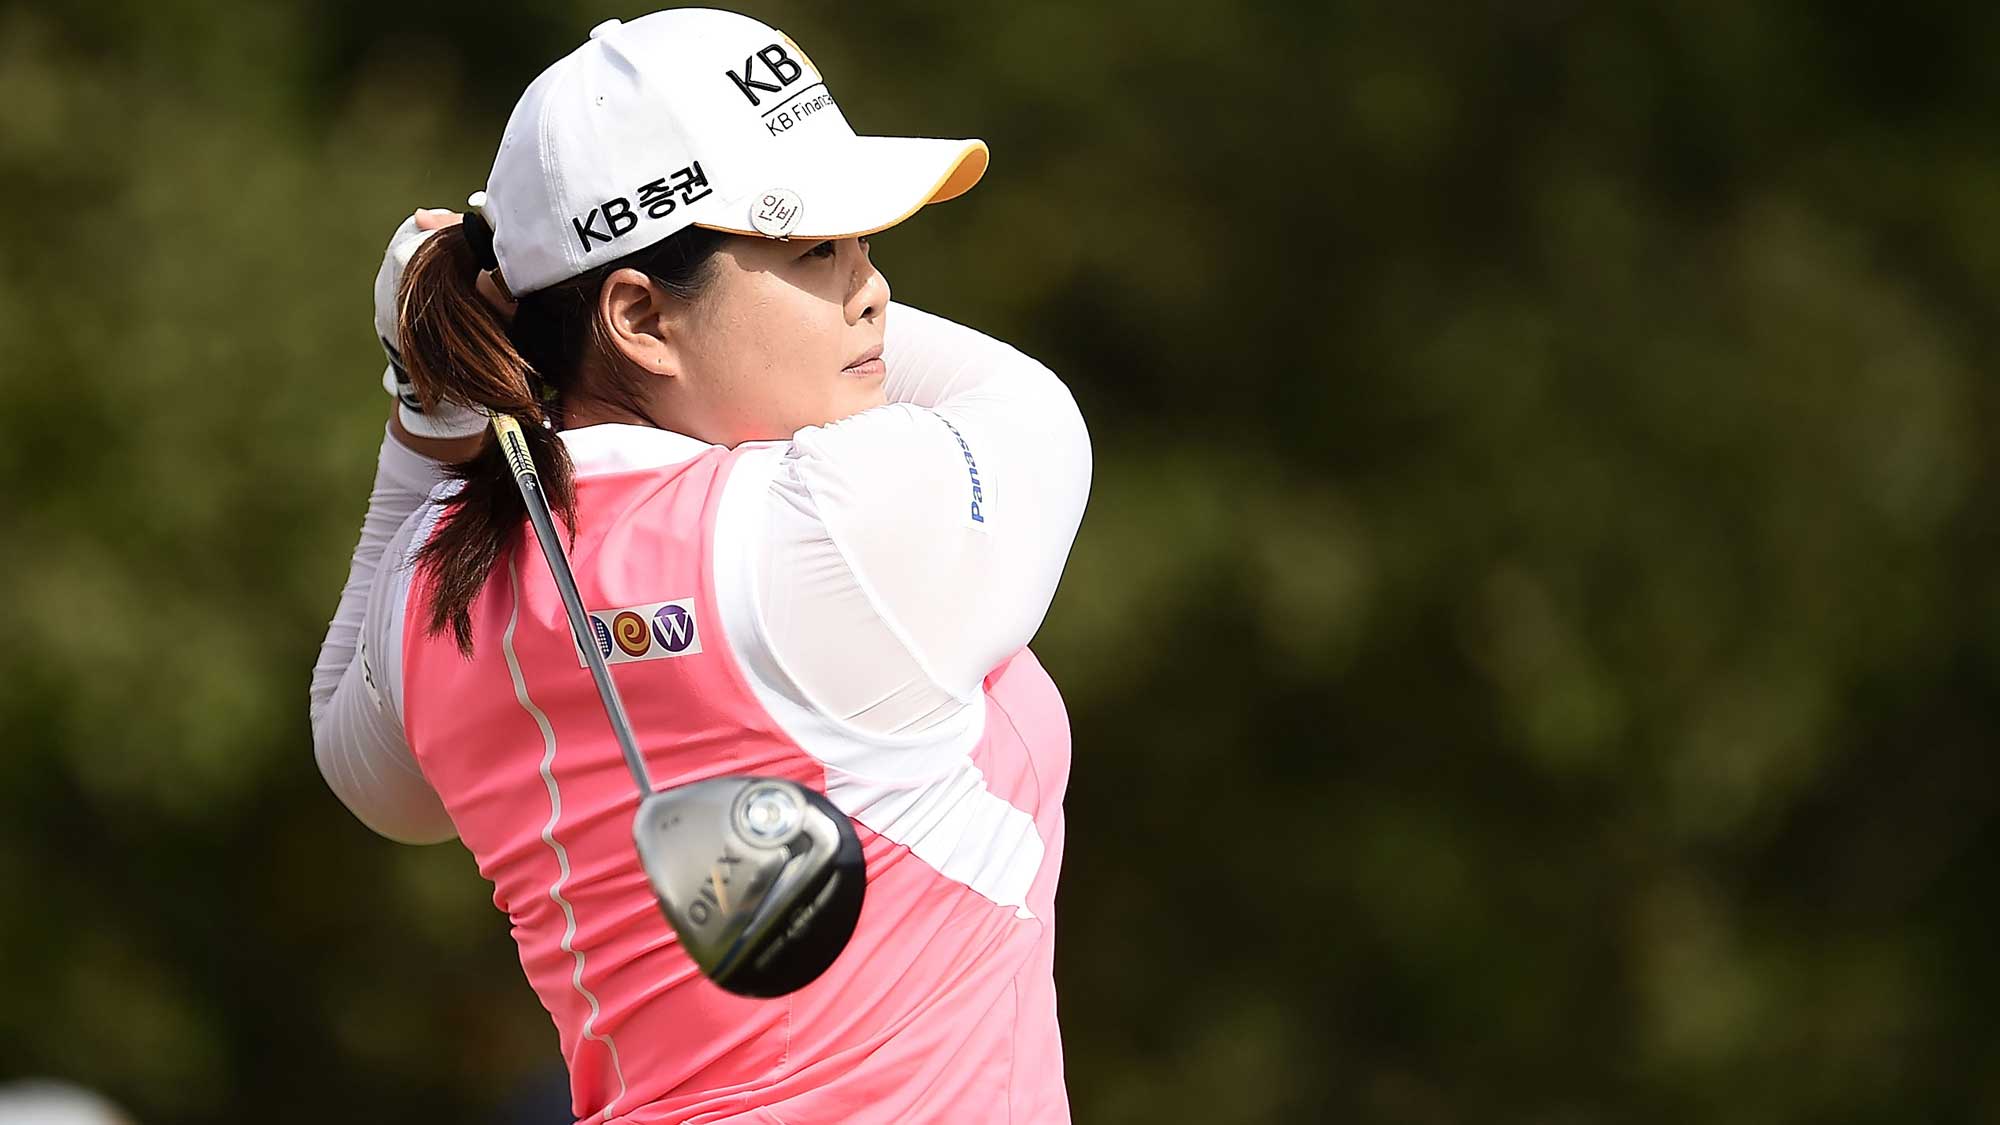 Inbee Park of South Korea hits her tee shot on the 16th hole during the second round of the Meijer LPGA Classic